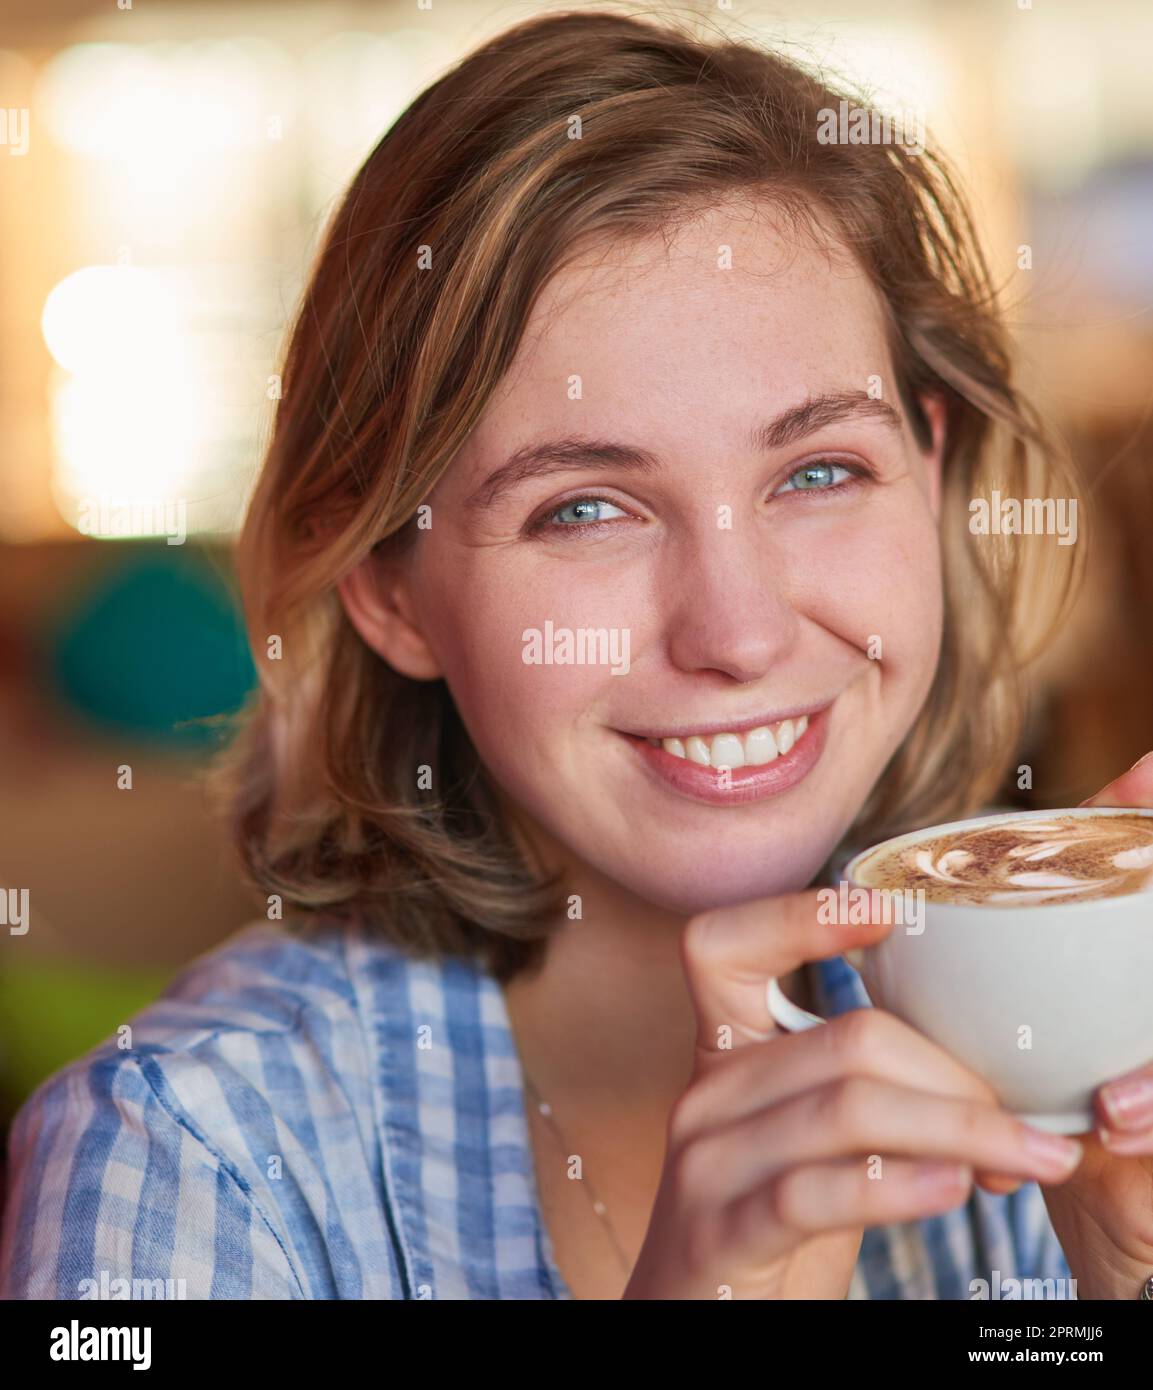 Home made cappuccinos just taste better. a happy young woman drinking a cappuccino at home. Stock Photo